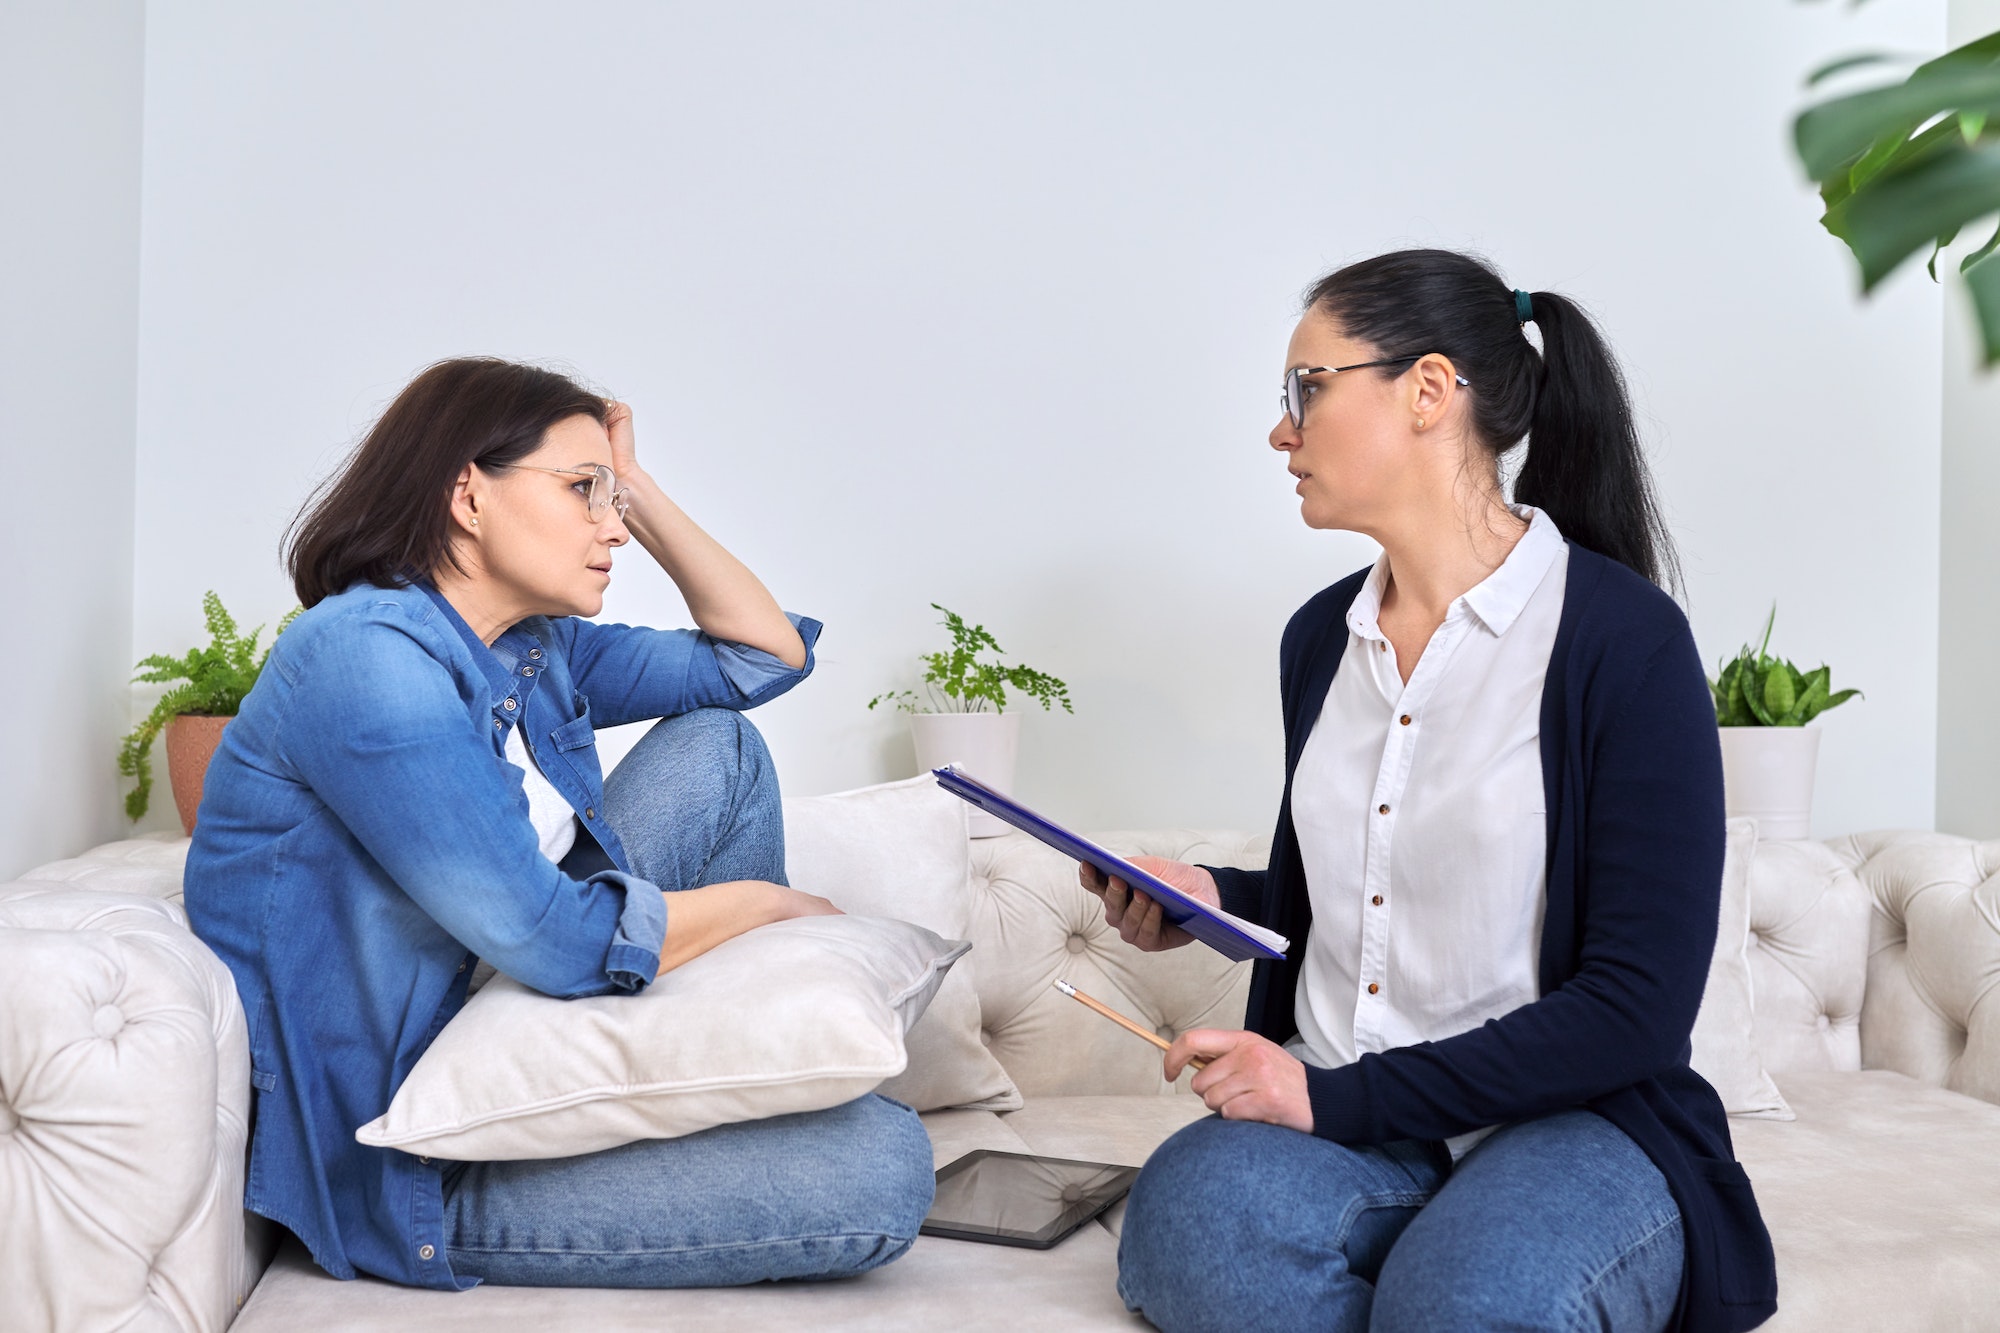 Mature woman at meeting with psychologist, therapist, counselor